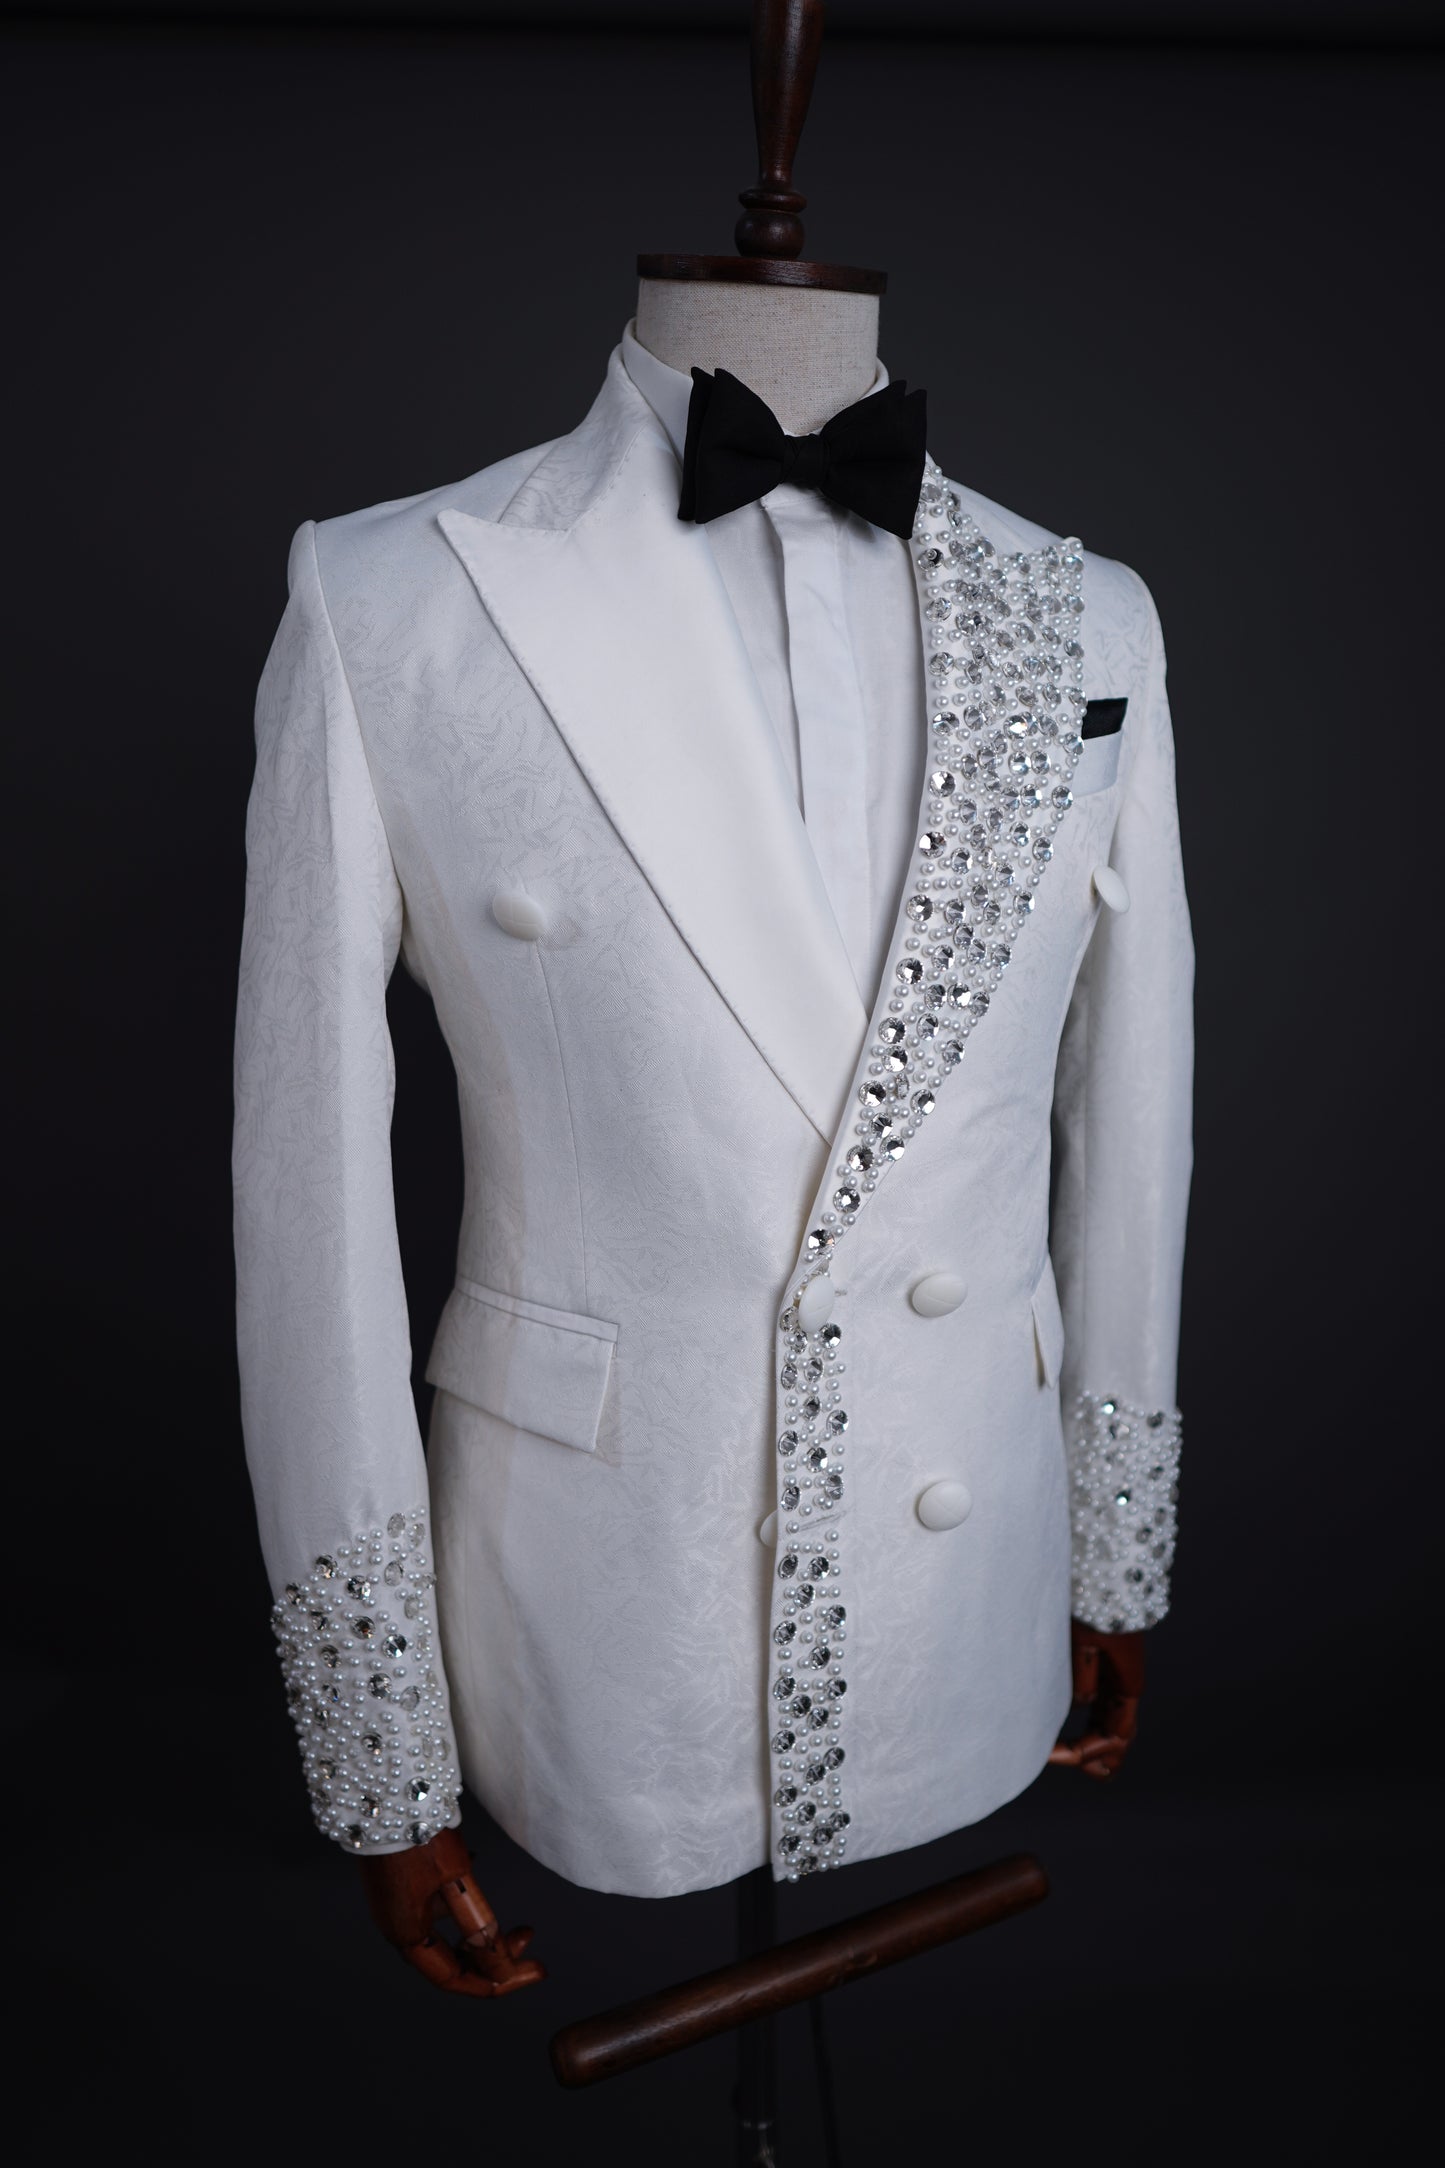 Black Jaquard tuxedo laced with crystal pearl beads